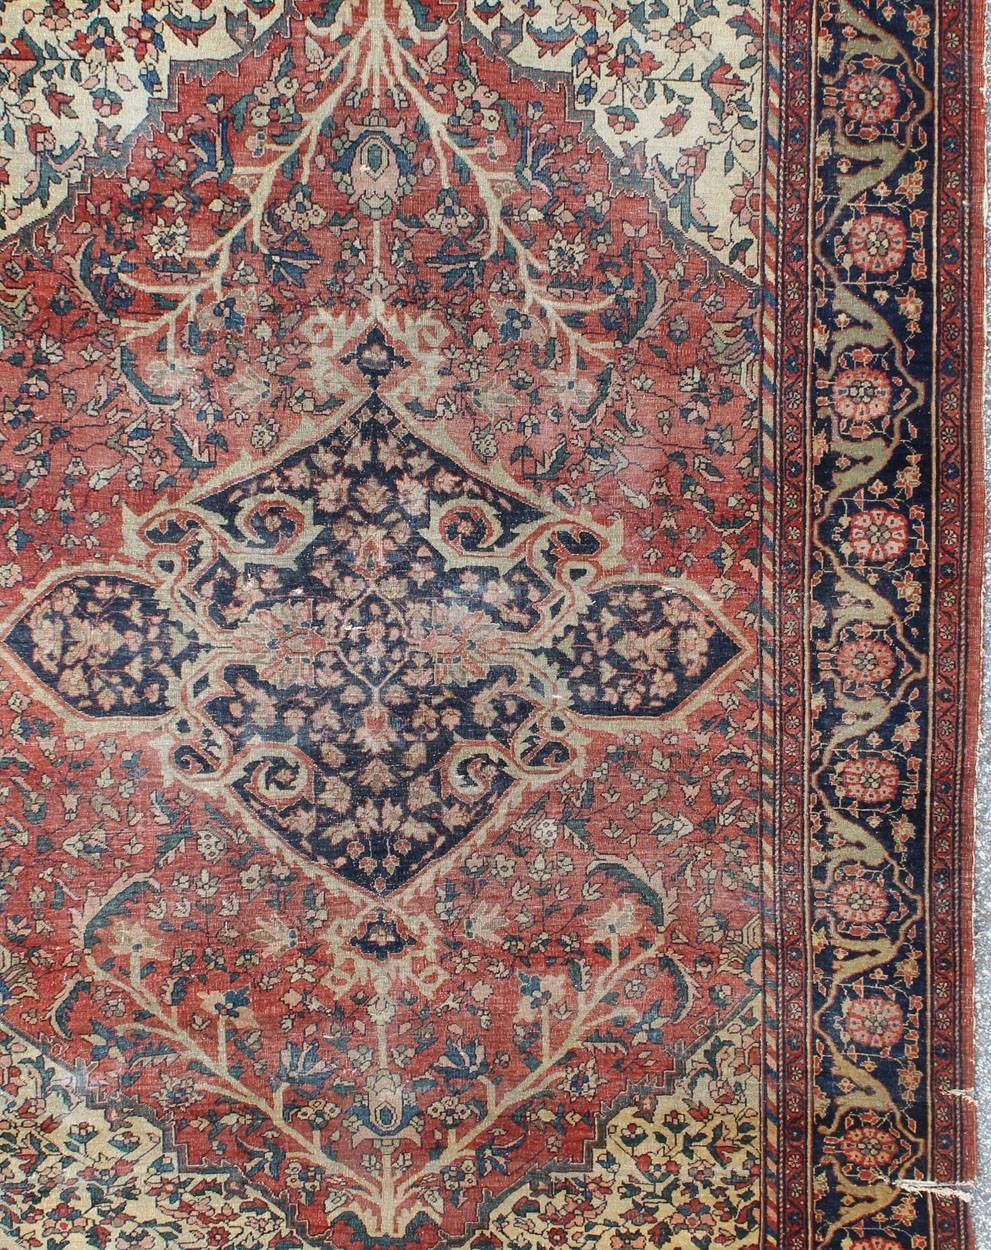 Hand-Knotted Antique Sarouk Faraghan Persian Rug with Florals in Navy, Red and Cream